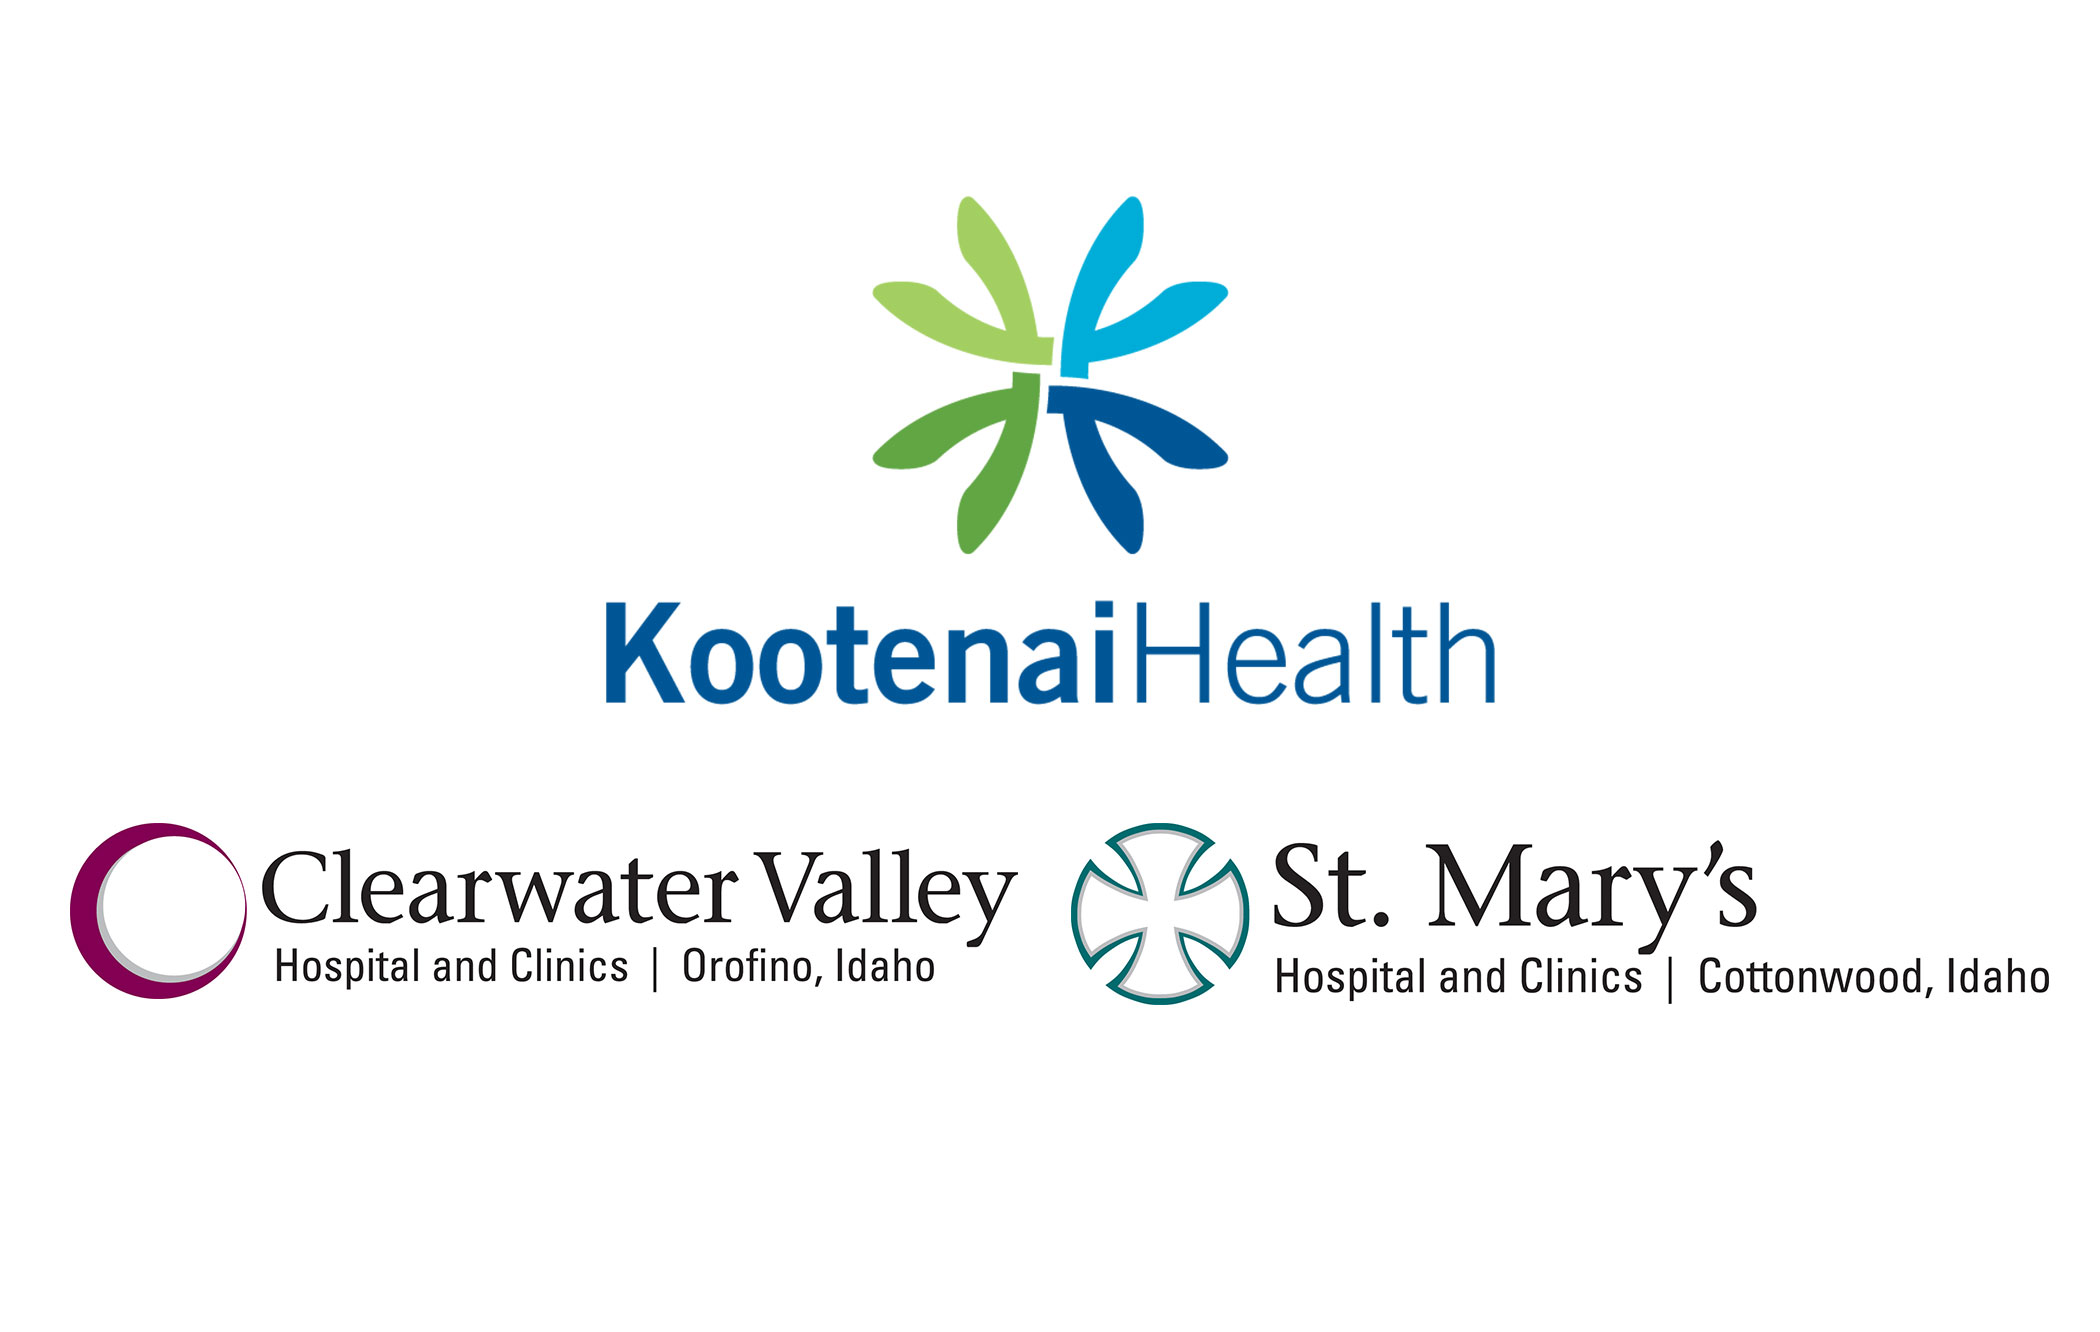 Clearwater Valley and St. Mary’s Hospital announce letter of intent to transfer ownership to Kootenai Health